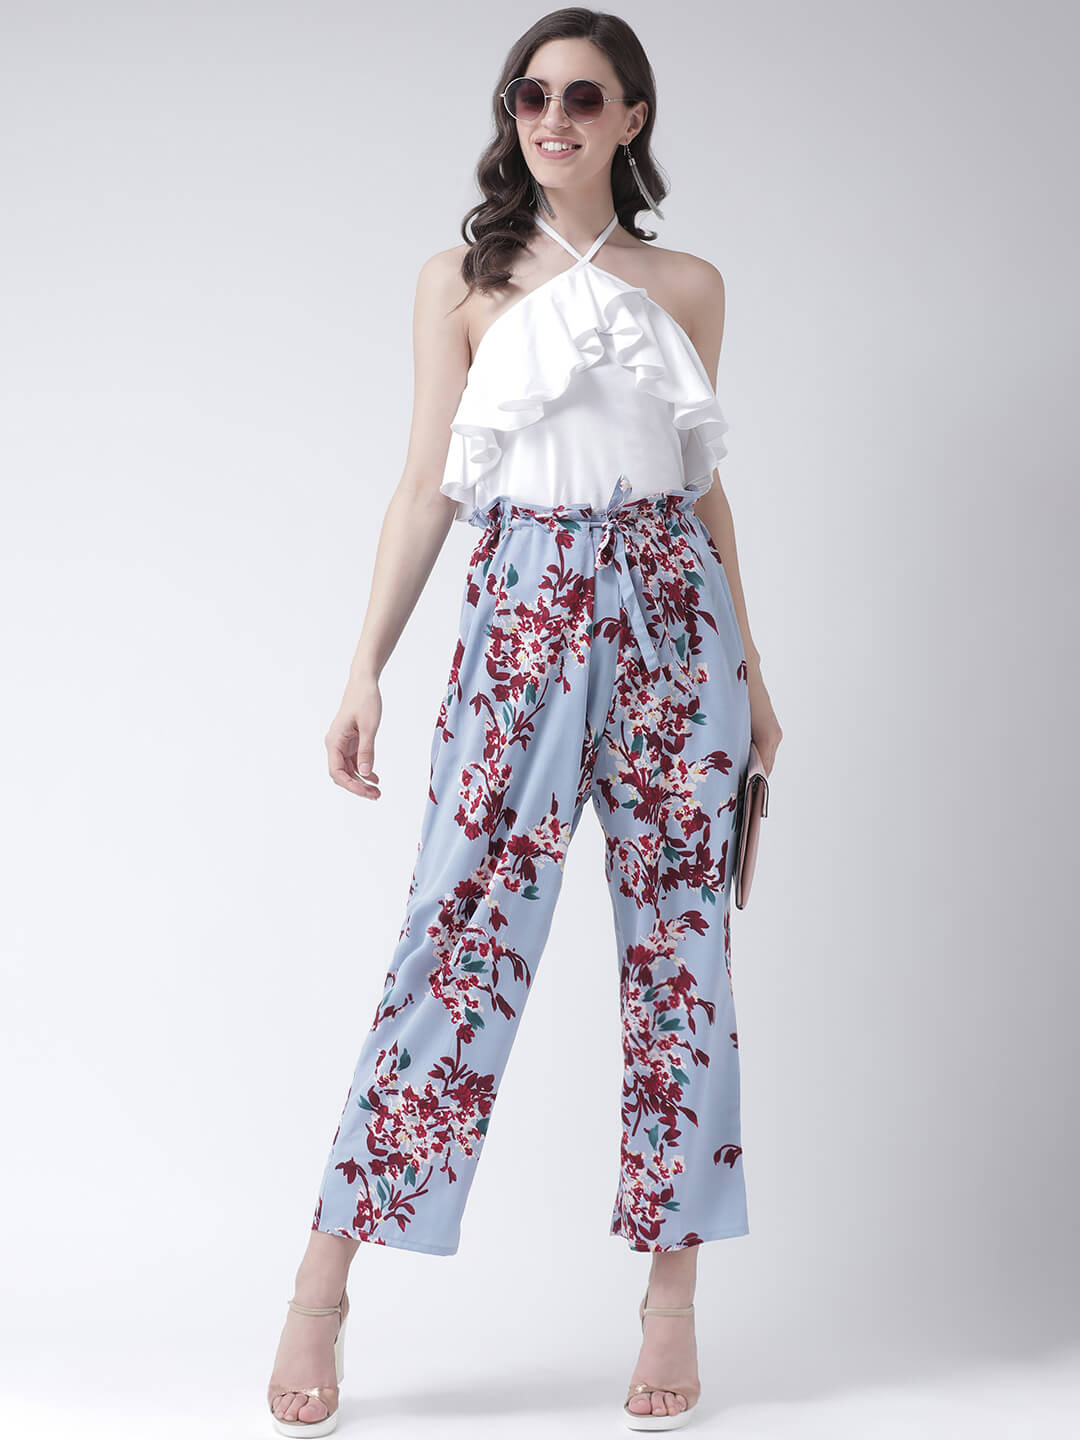 The Vanca'S Floral Print Trouser With Paper Bag Frill And Front Pleat Detail